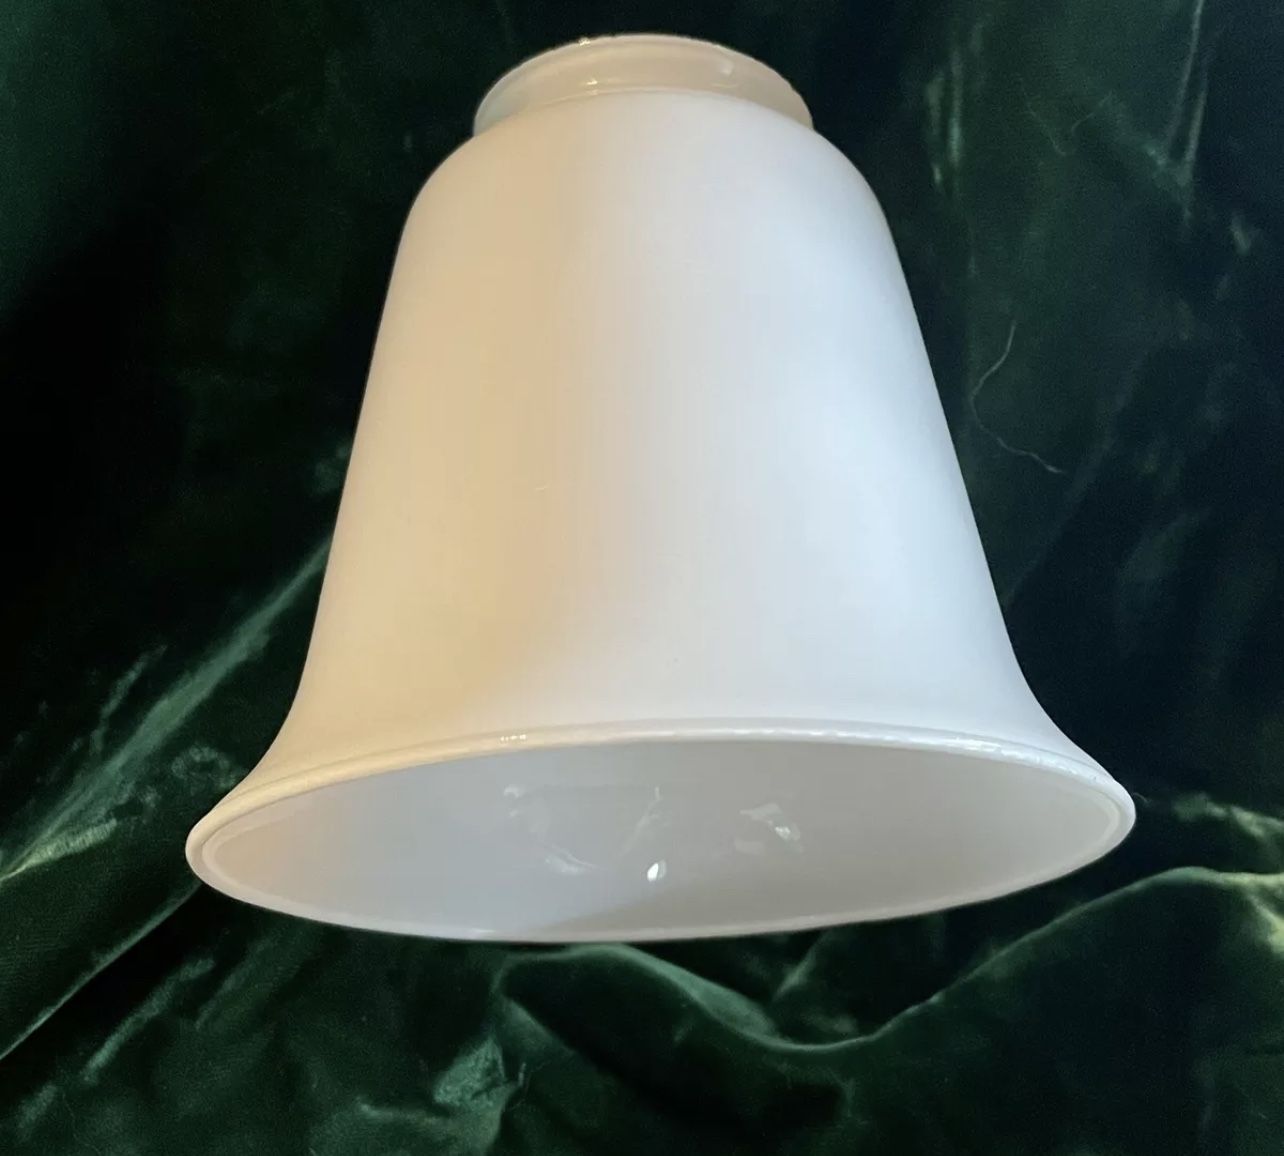  2 1/4" Fitter Cased Opal White Tulip Glass Lamp Fixture Shade 